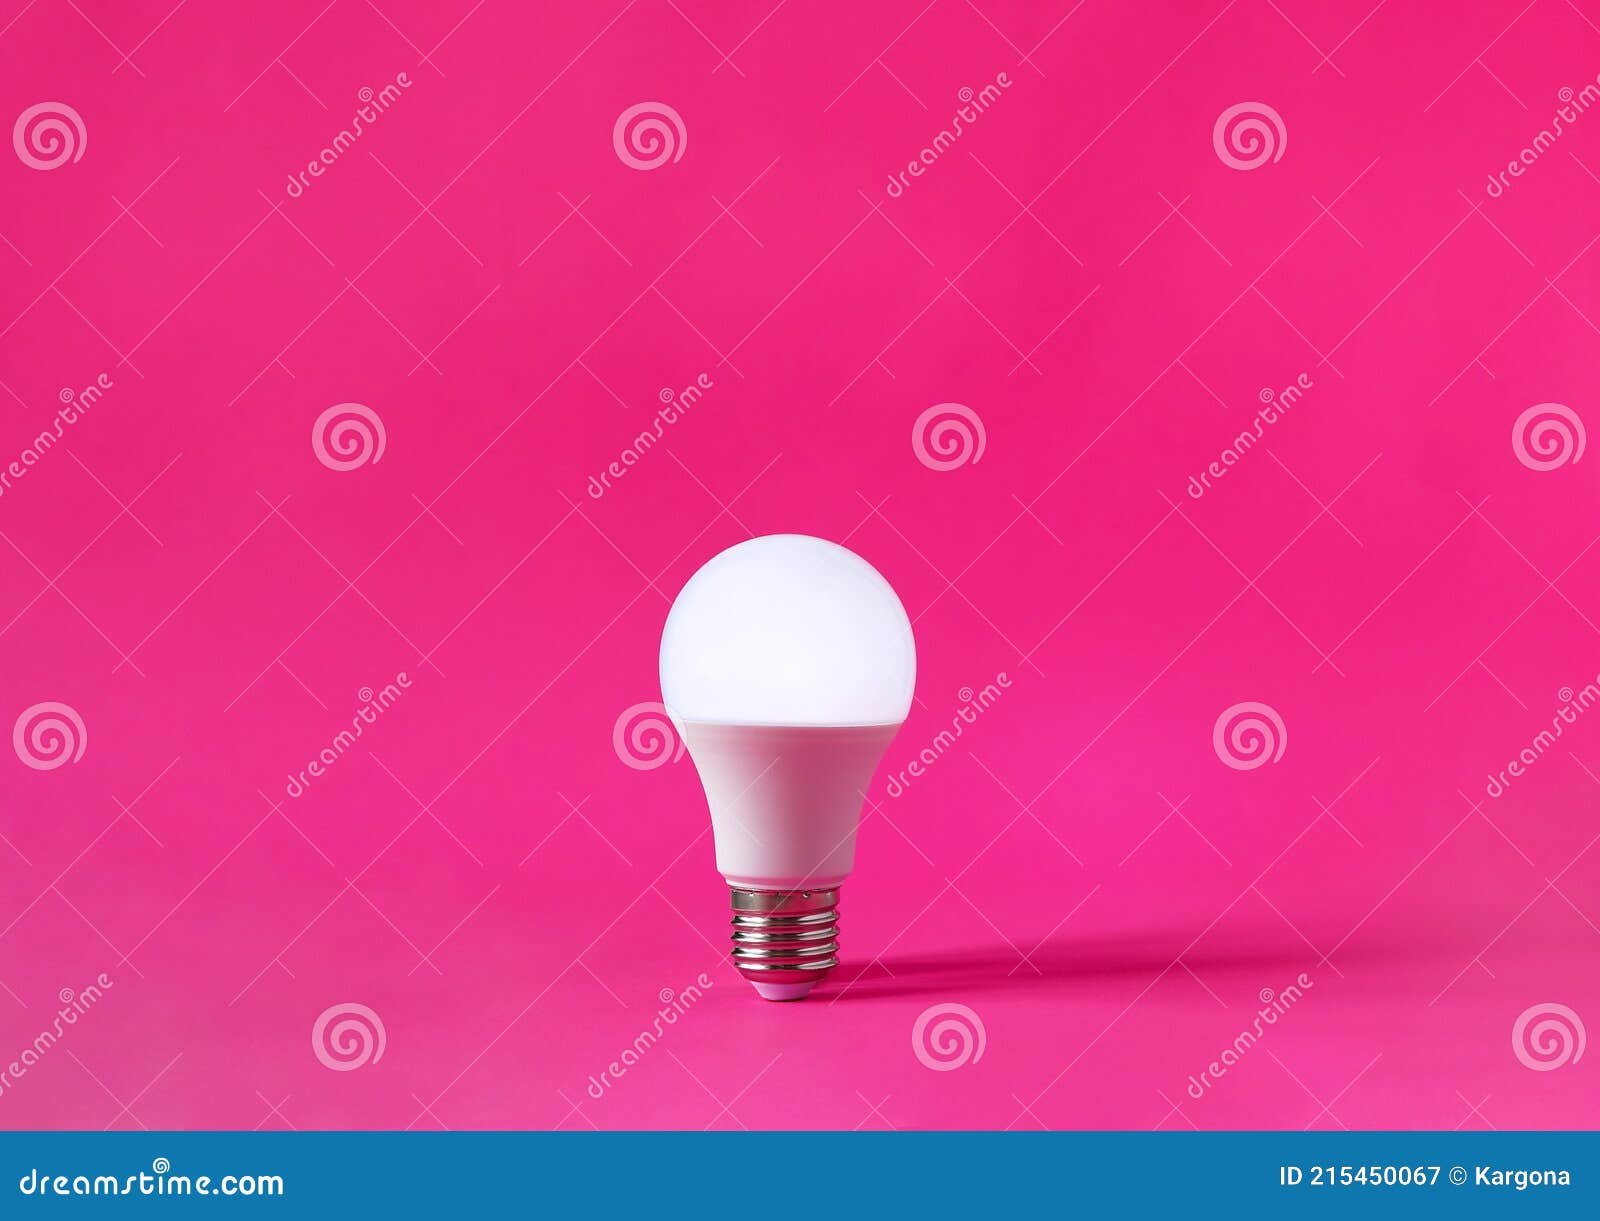 glowing light bulb on magenta background. discovery, invention, new idea concept